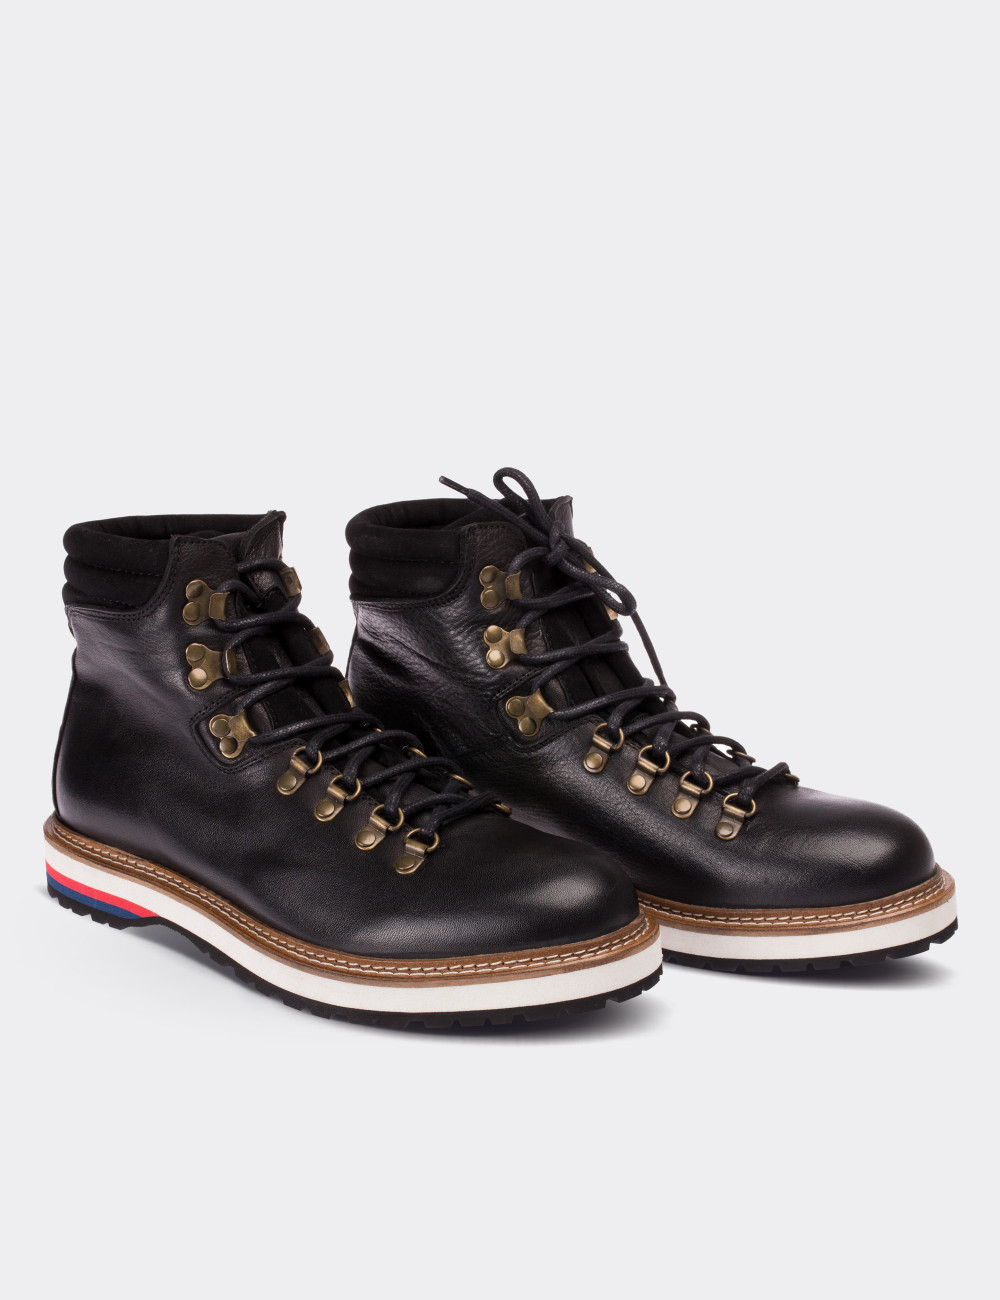 Black  Leather Boots - 01589MSYHE01